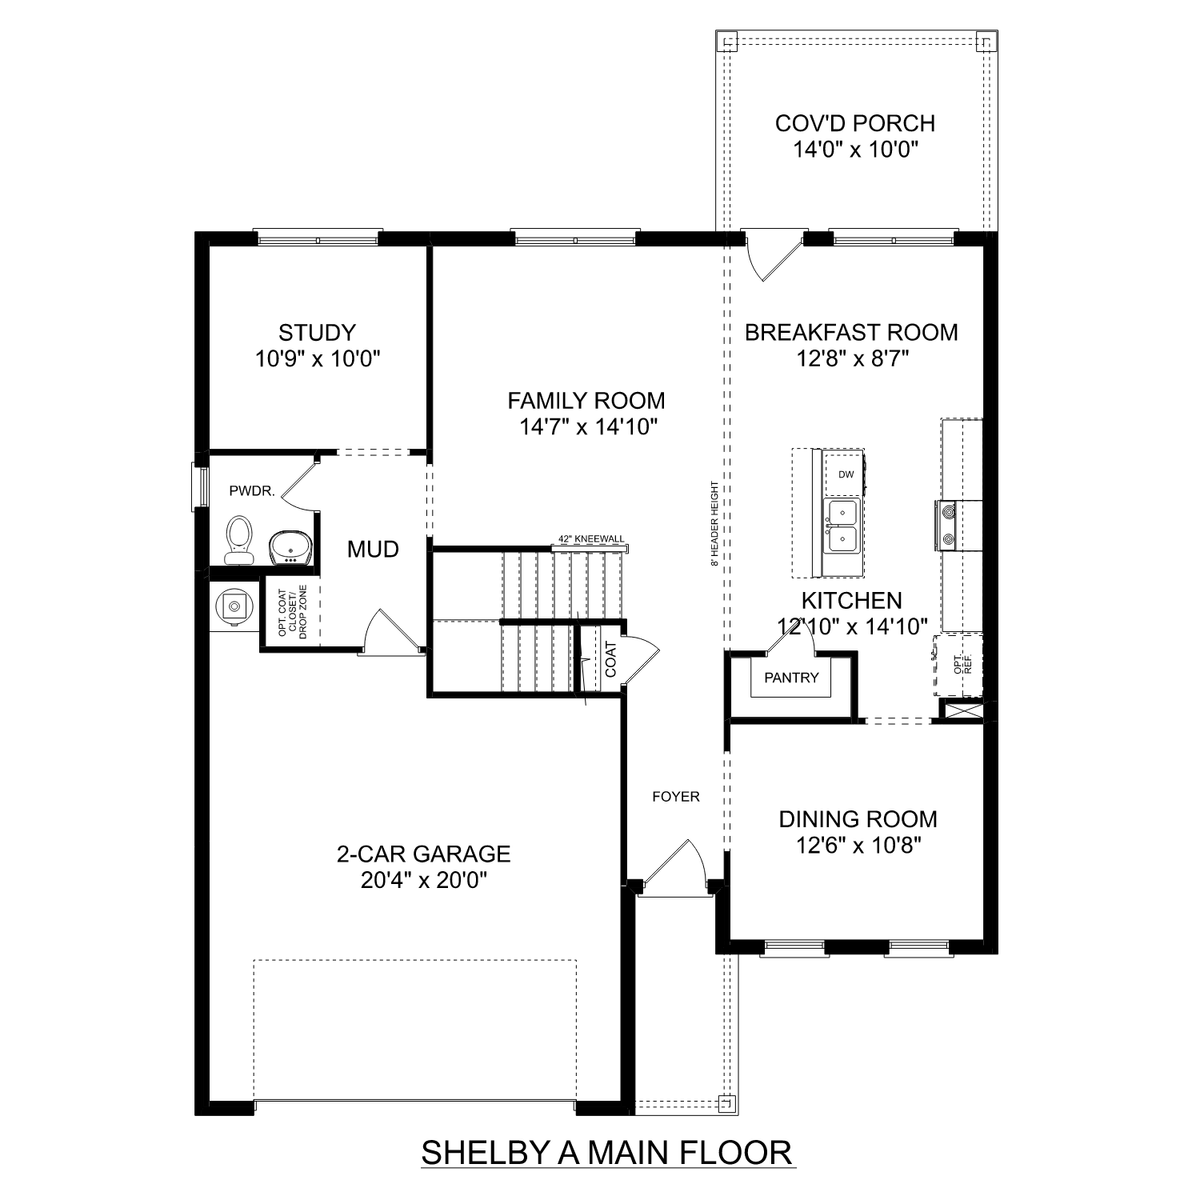 1 - The Shelby A buildable floor plan layout in Davidson Homes' Blue Spring community.